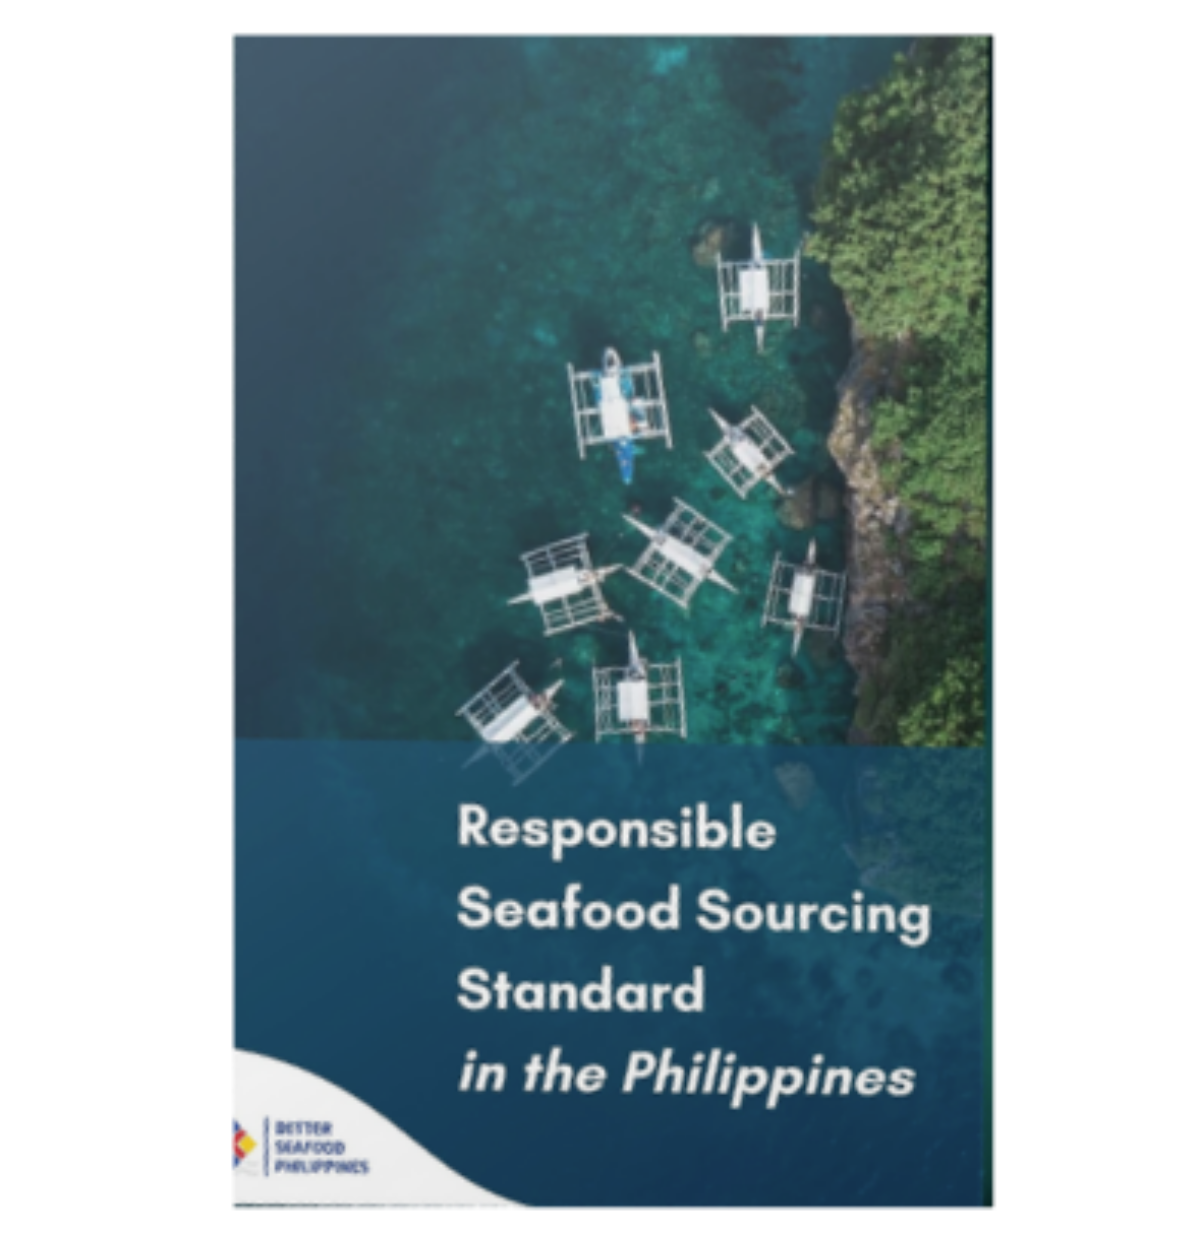 RSS Guide Philippines